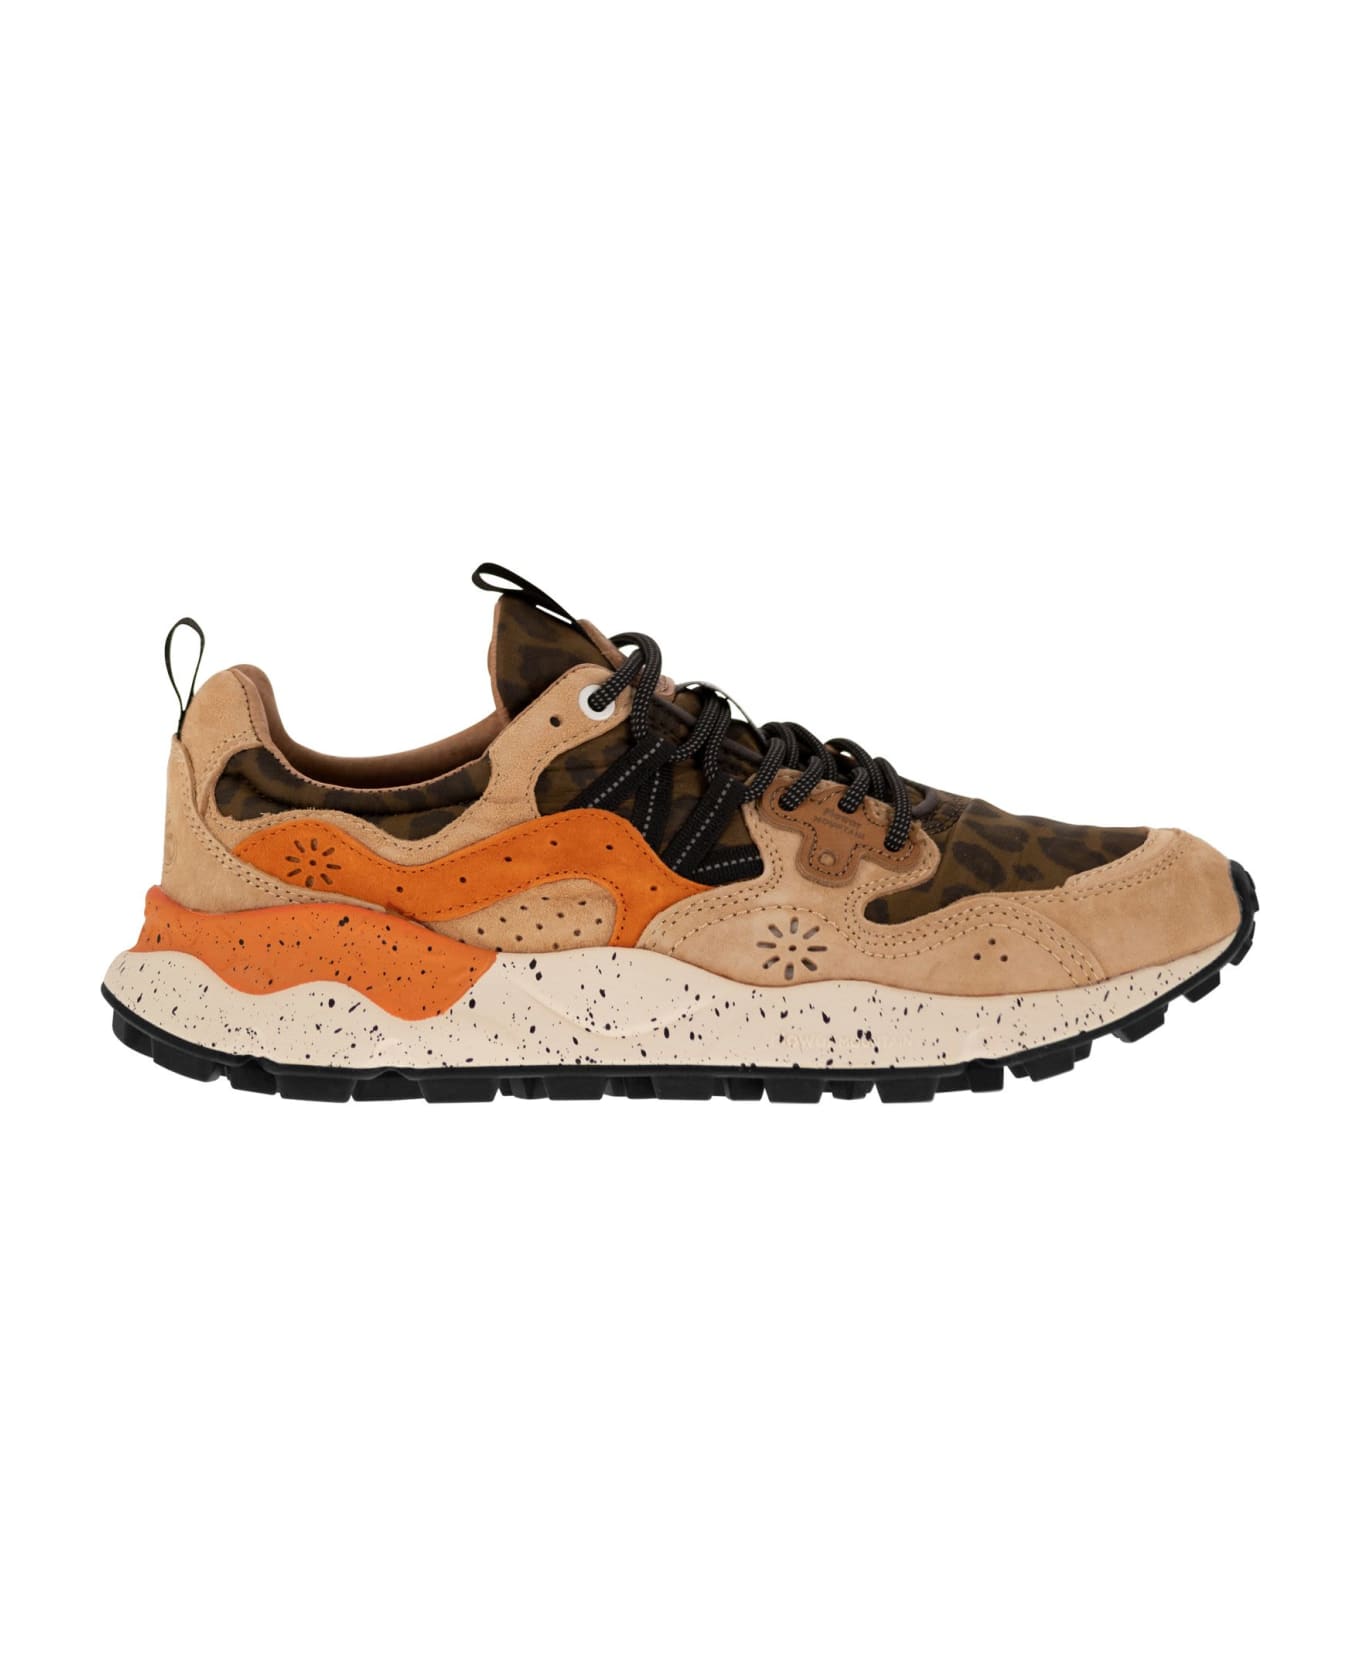 Flower Mountain Yamano 3 - Sneakers In Suede And Technical Fabric - Beige